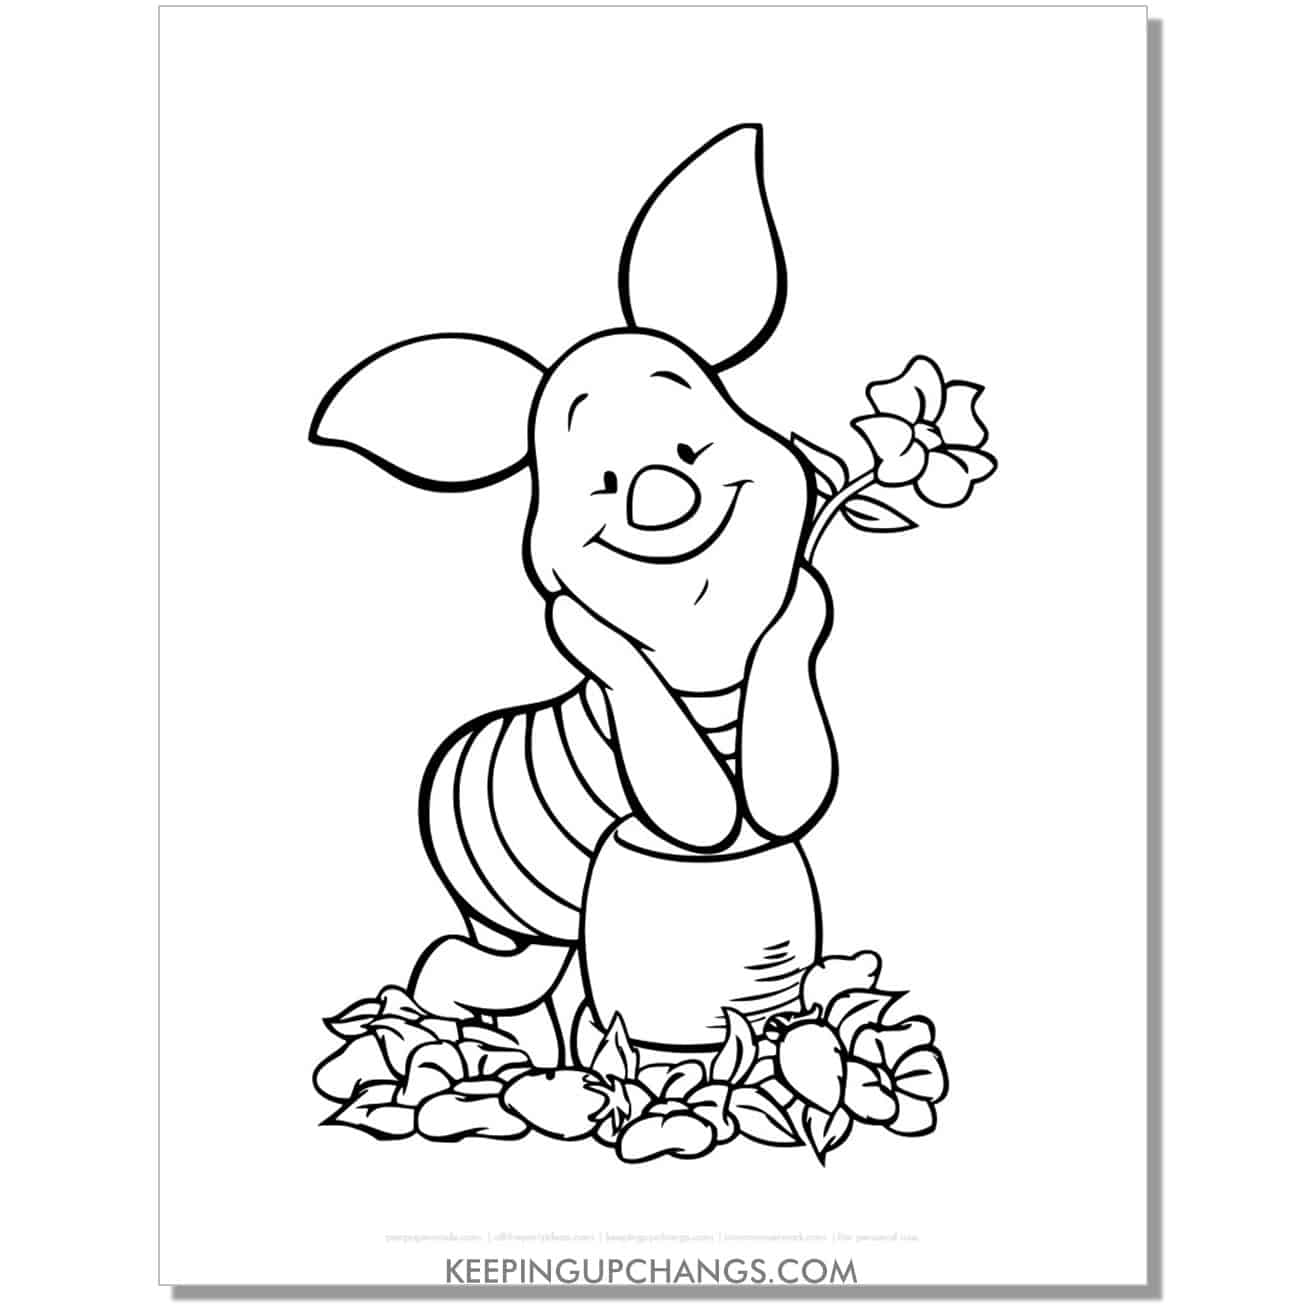 piglet holding flower coloring page, sheet.